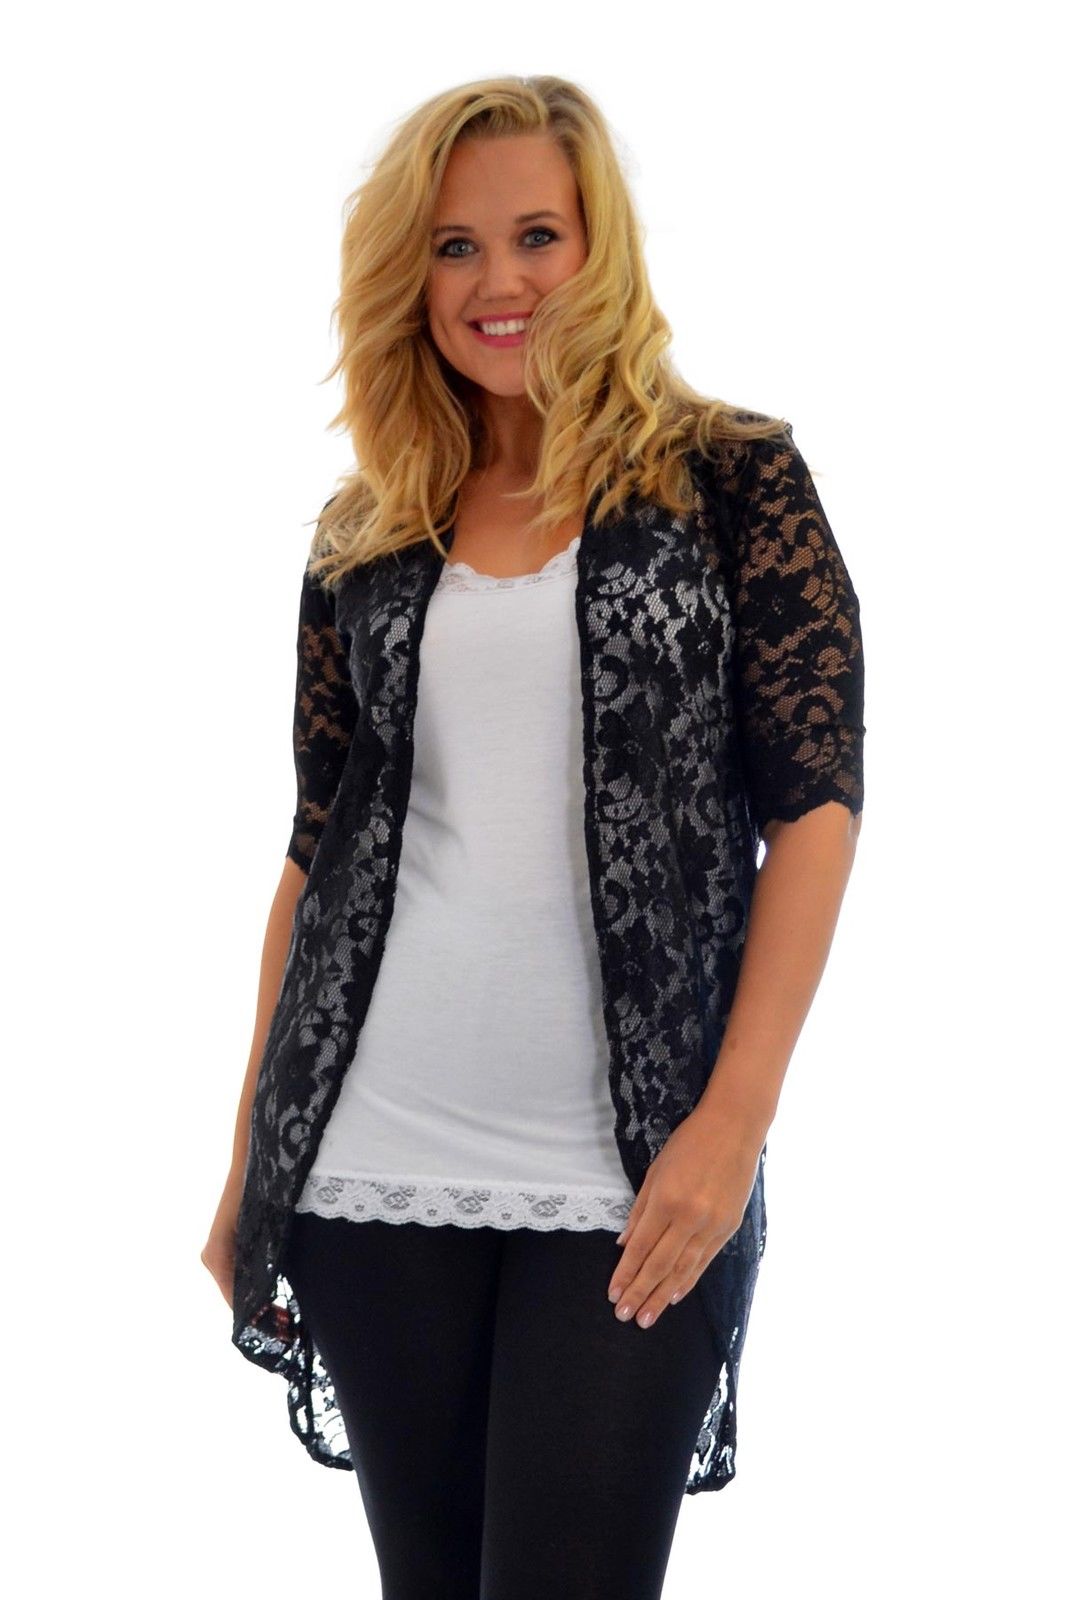 Room short cardigans womens uk clothing stores from